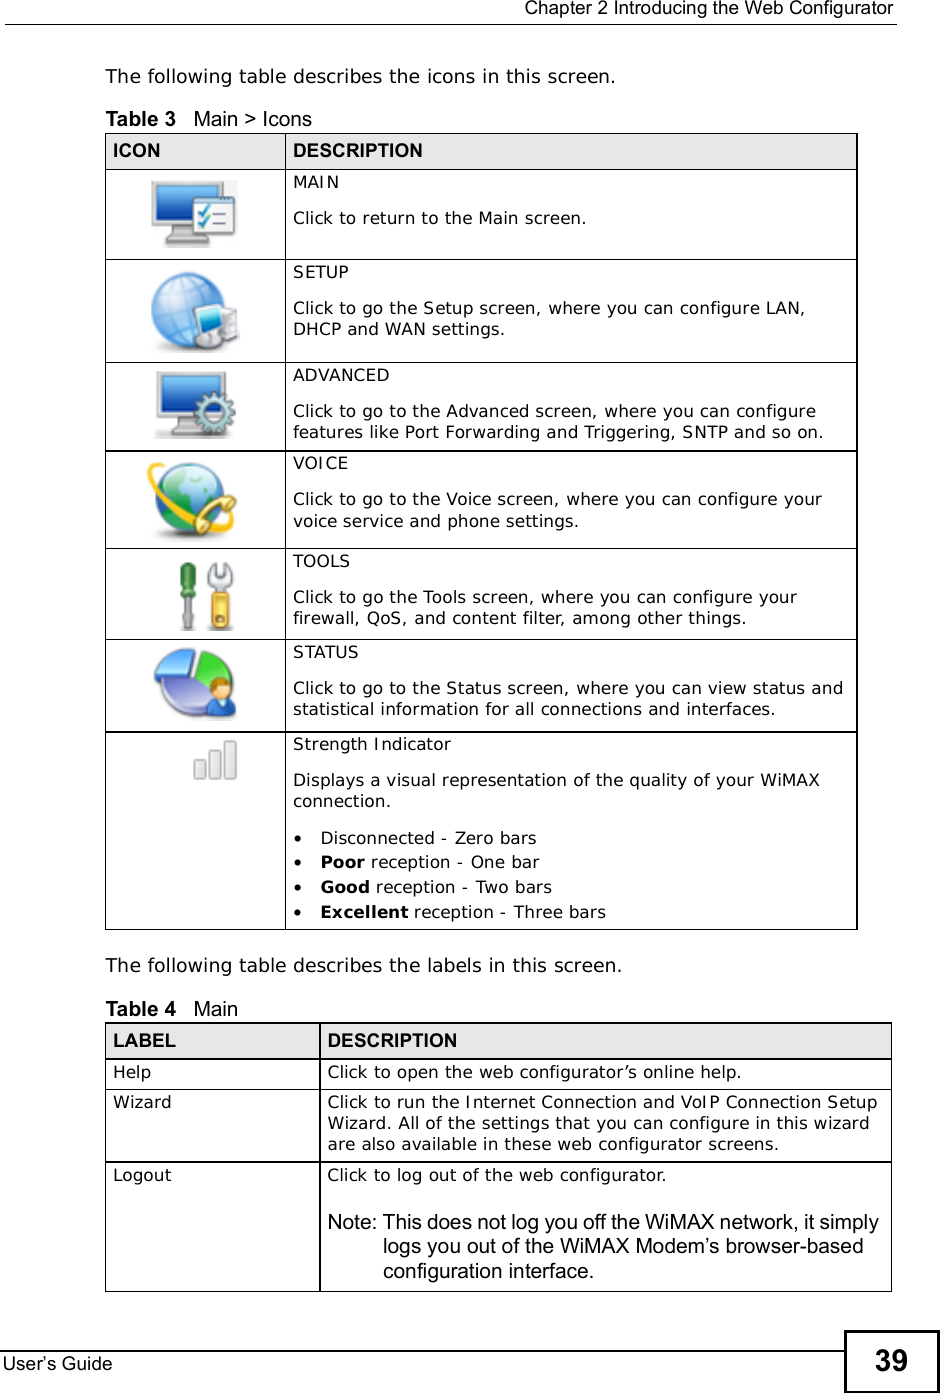  Chapter 2Introducing the Web ConfiguratorUser s Guide 39The following table describes the icons in this screen.The following table describes the labels in this screen. Table 3   Main &gt; IconsICON DESCRIPTIONMAINClick to return to the Main screen.SETUPClick to go the Setup screen, where you can configure LAN, DHCP and WAN settings.ADVANCEDClick to go to the Advanced screen, where you can configure features like Port Forwarding and Triggering, SNTP and so on.VOICEClick to go to the Voice screen, where you can configure your voice service and phone settings.TOOLSClick to go the Tools screen, where you can configure your firewall, QoS, and content filter, among other things.STATUSClick to go to the Status screen, where you can view status and statistical information for all connections and interfaces.Strength IndicatorDisplays a visual representation of the quality of your WiMAX connection.•Disconnected - Zero bars•Poor reception - One bar•Good reception - Two bars•Excellent reception - Three barsTable 4   MainLABEL DESCRIPTIONHelpClick to open the web configurator’s online help.WizardClick to run the Internet Connection and VoIP Connection Setup Wizard. All of the settings that you can configure in this wizard are also available in these web configurator screens.LogoutClick to log out of the web configurator.Note: This does not log you off the WiMAX network, it simply logs you out of the WiMAX Modem s browser-based configuration interface.